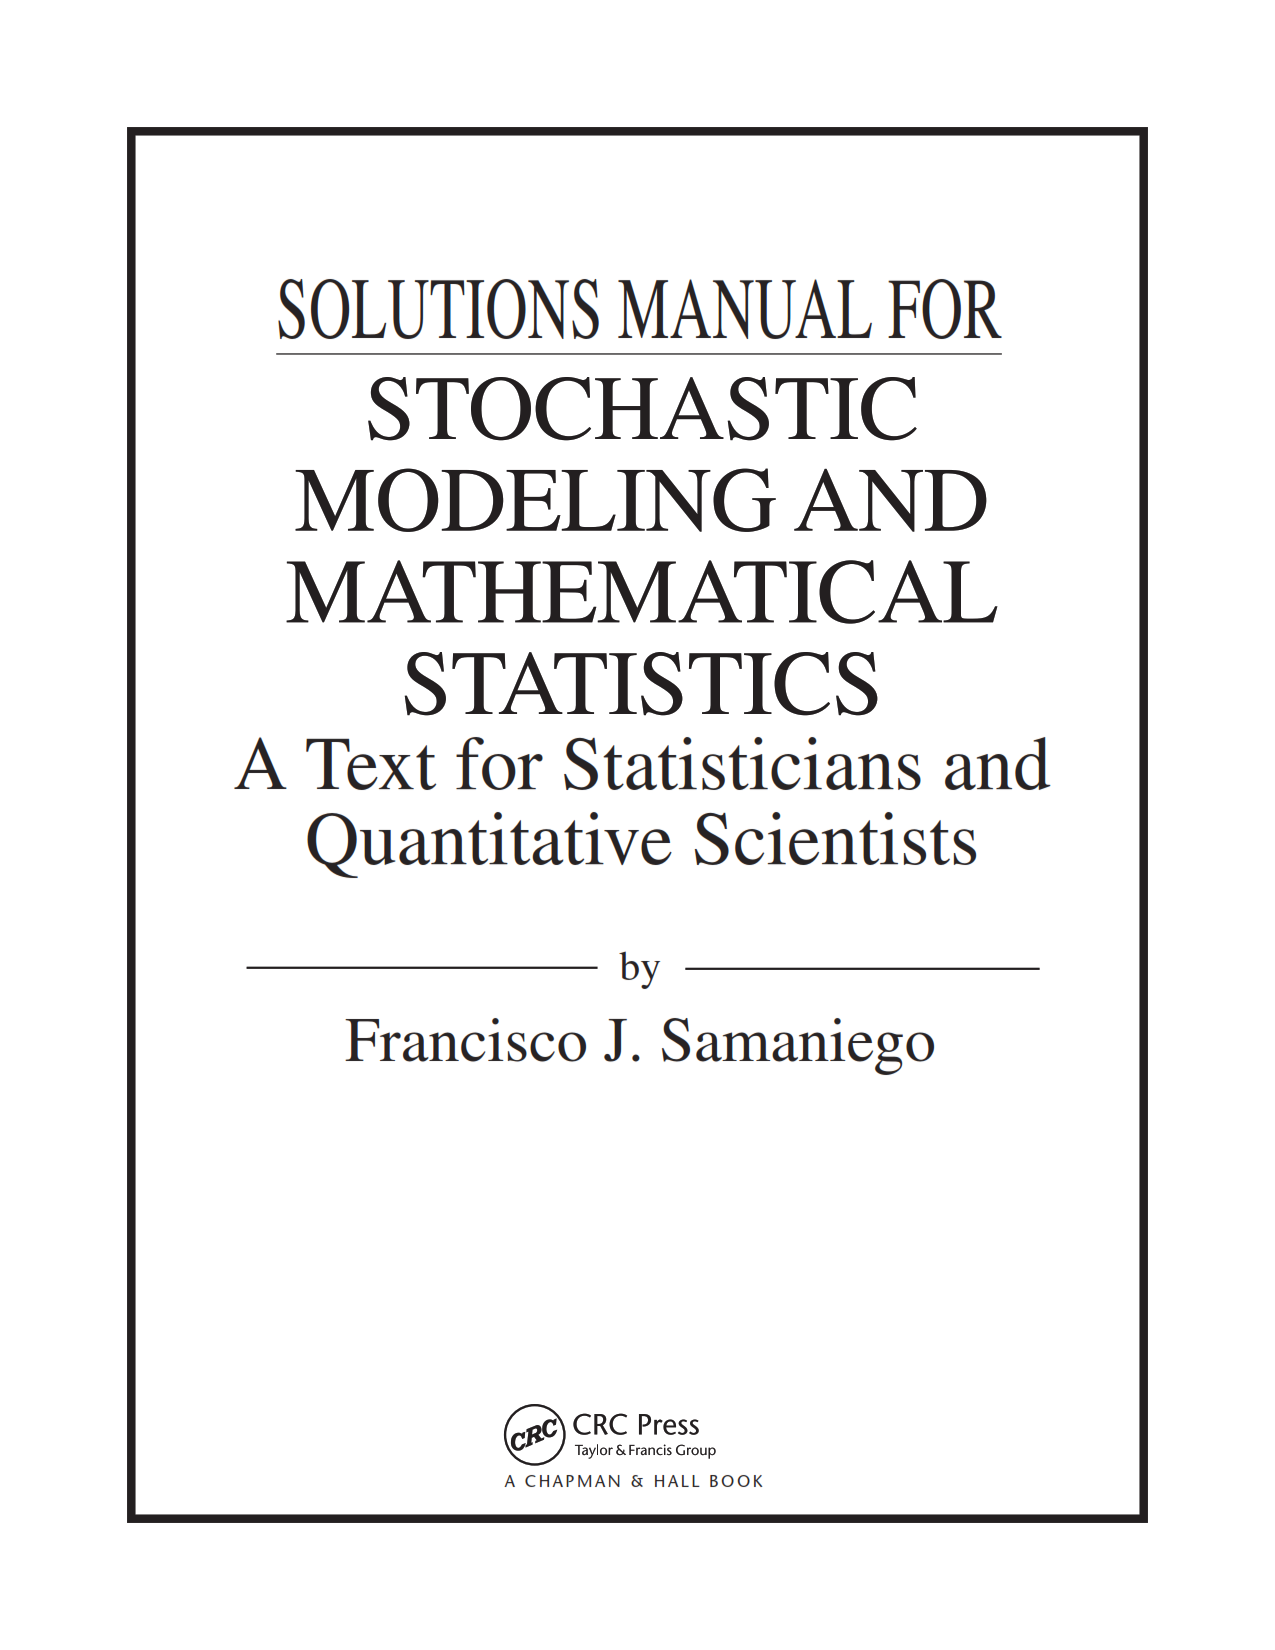 Download free Stochastic Modeling and Mathematical Statistics Francisco J. Samaniego 1st edition Solutions manual pdf | Gioumeh solution